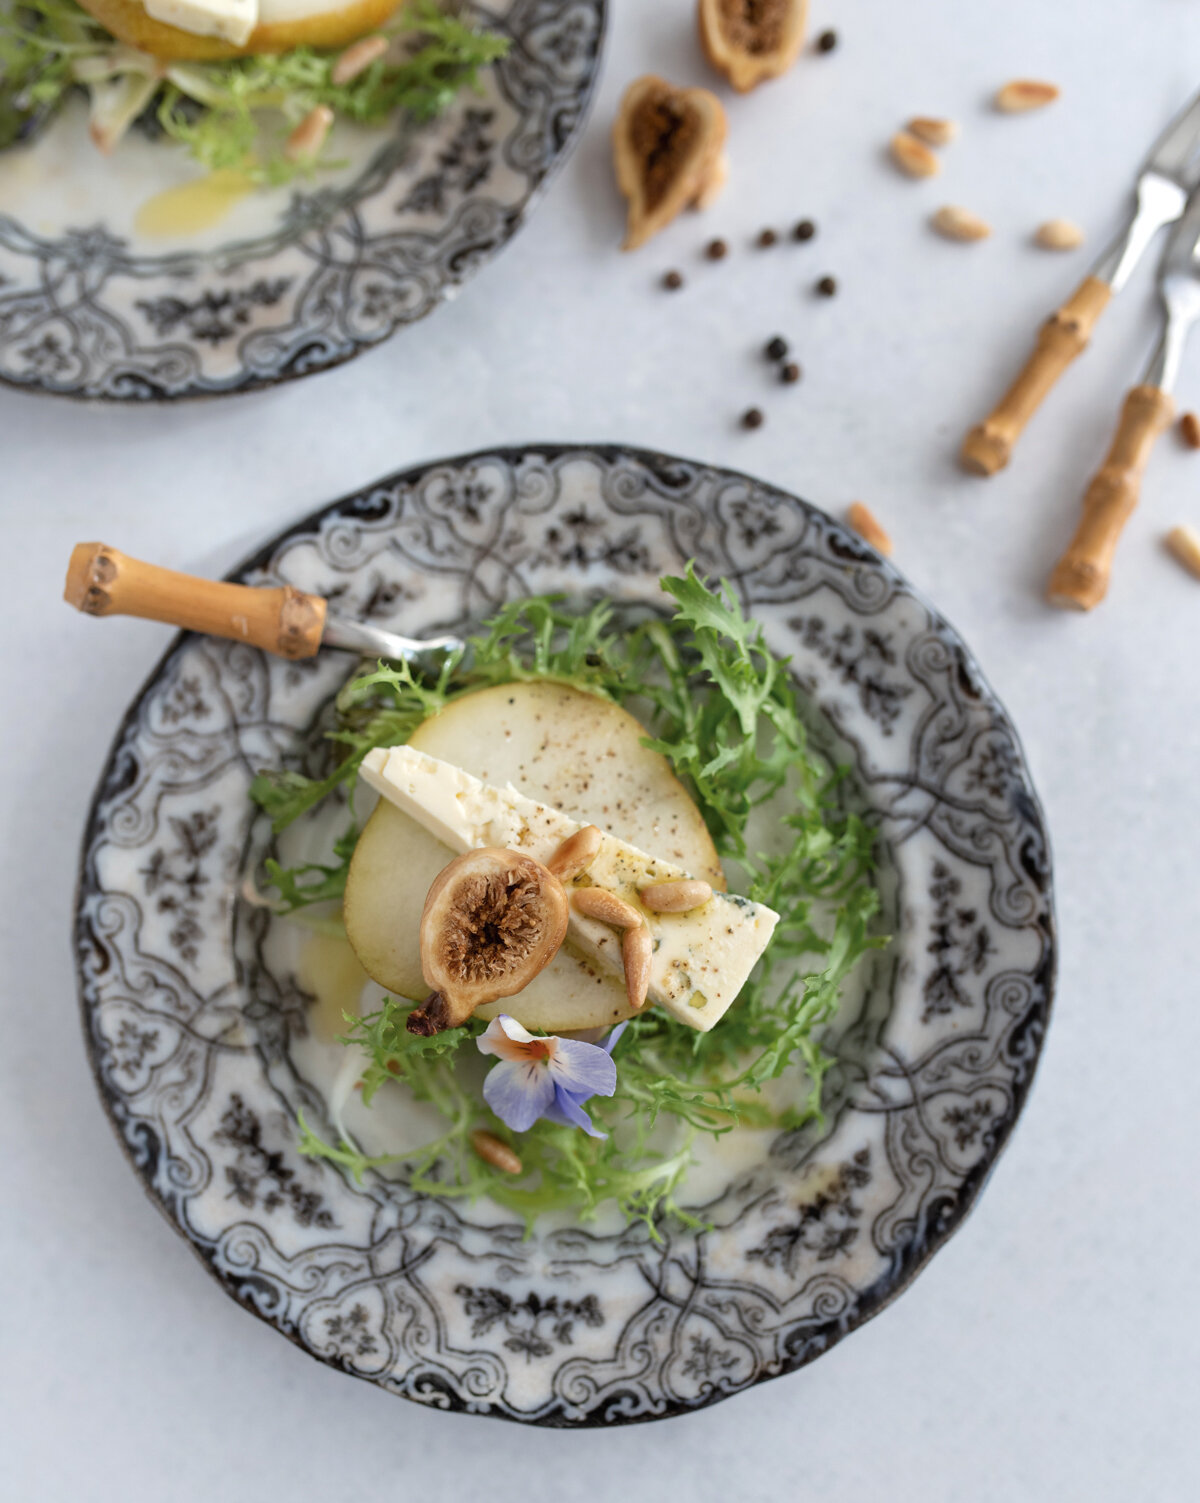 Pear and Gorgonzola Salad with Dried Figs and Pine Nuts - The Art of Salad by Julie Deffense